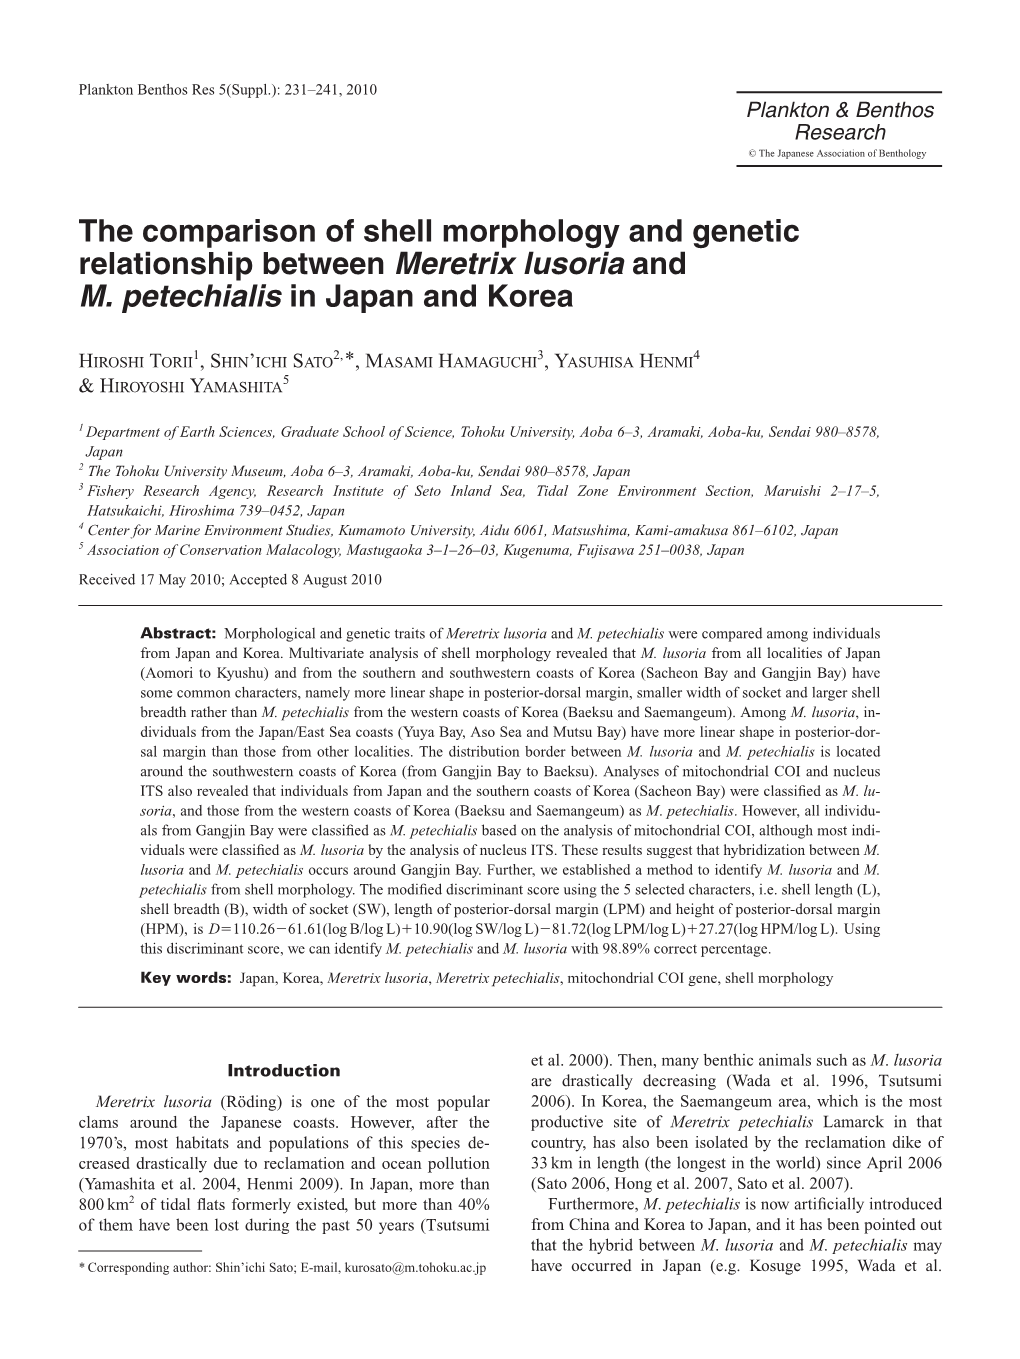 The Comparison of Shell Morphology and Genetic Relationship Between Meretrix Lusoria and M. Petechialis in Japan and Korea